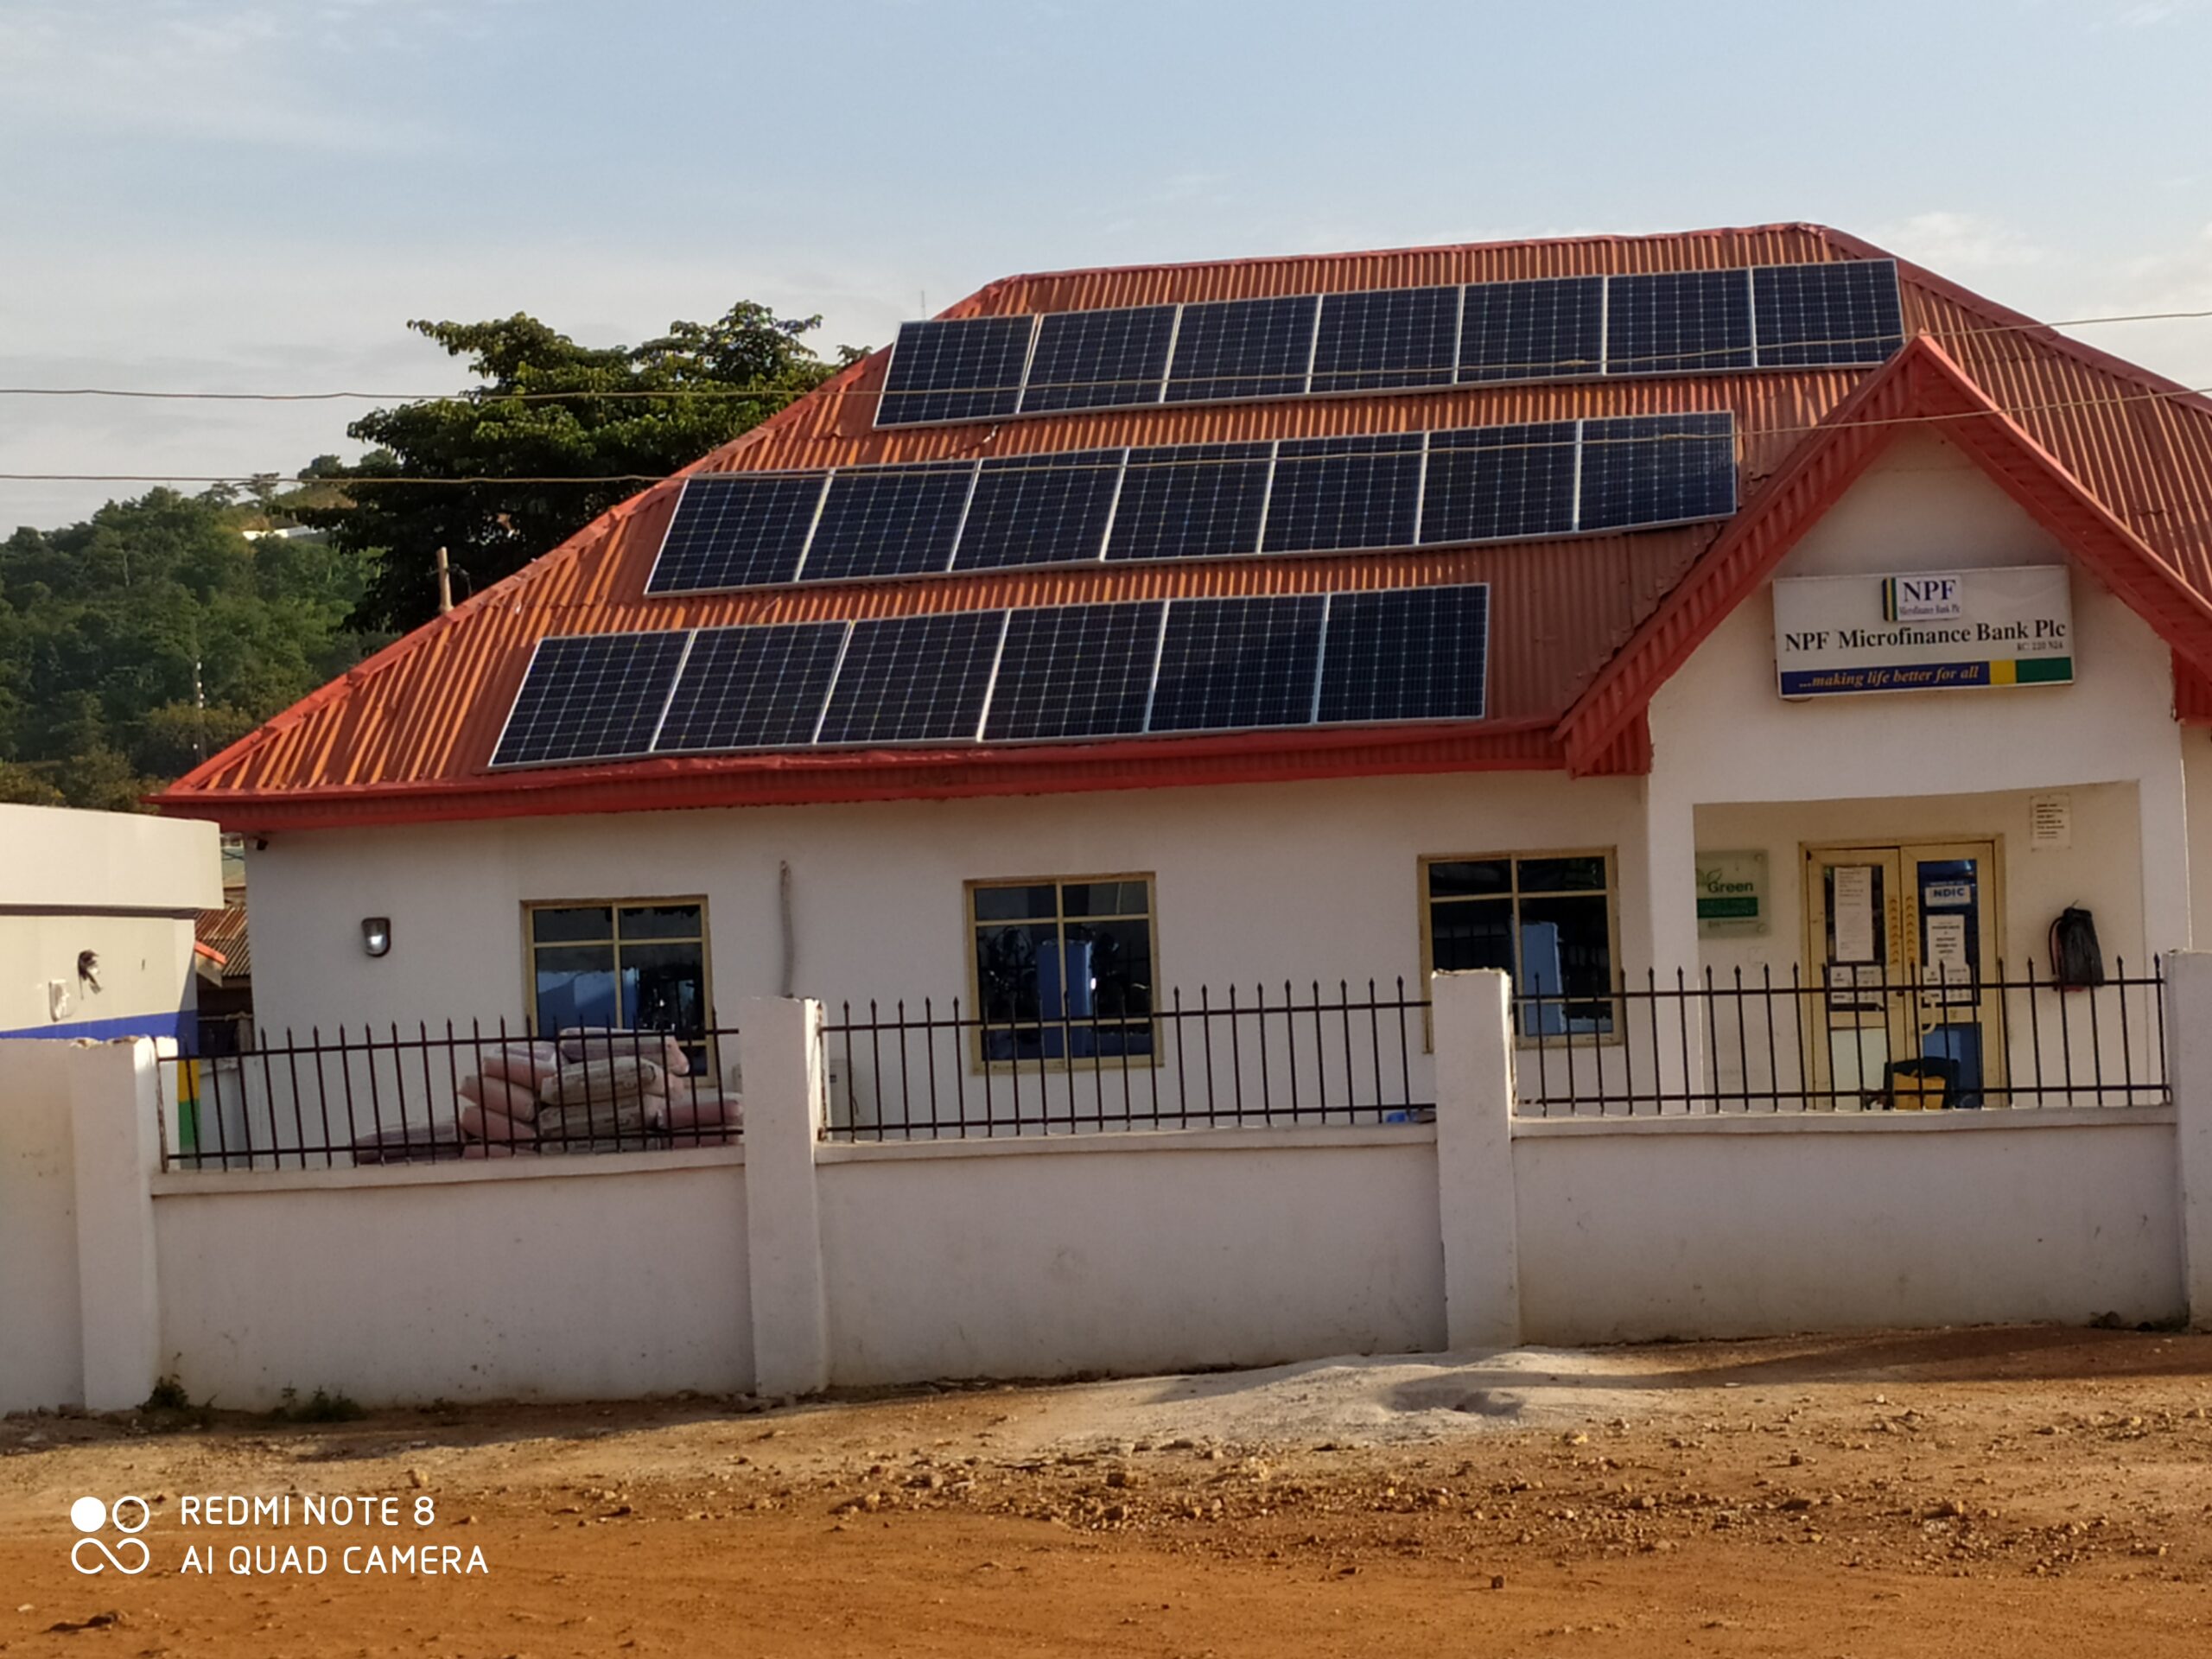 POWERING OF BANK ATM MACHINES WITH SOLAR